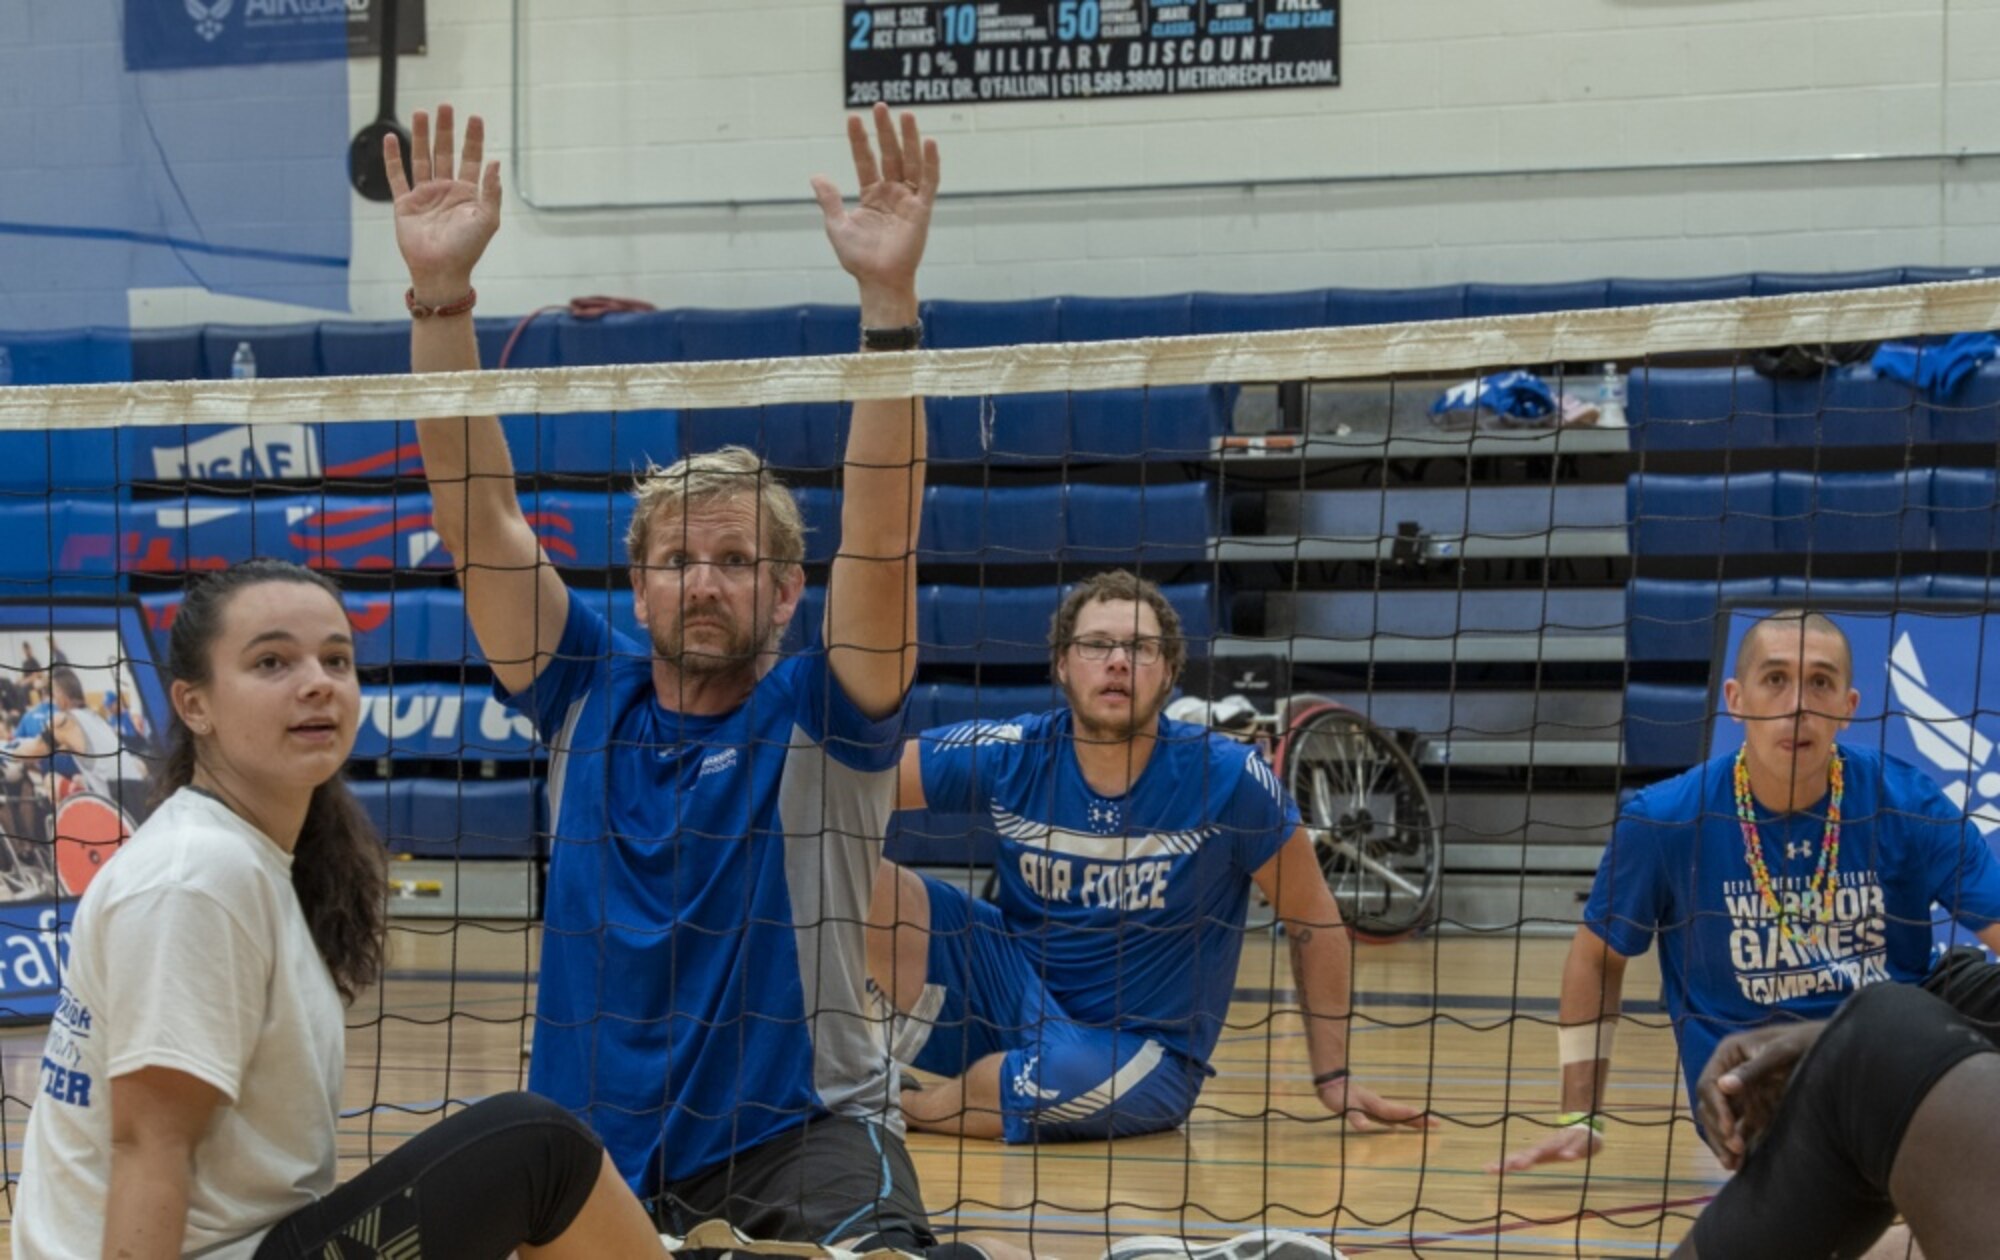 Wounded warriors play volleyball.